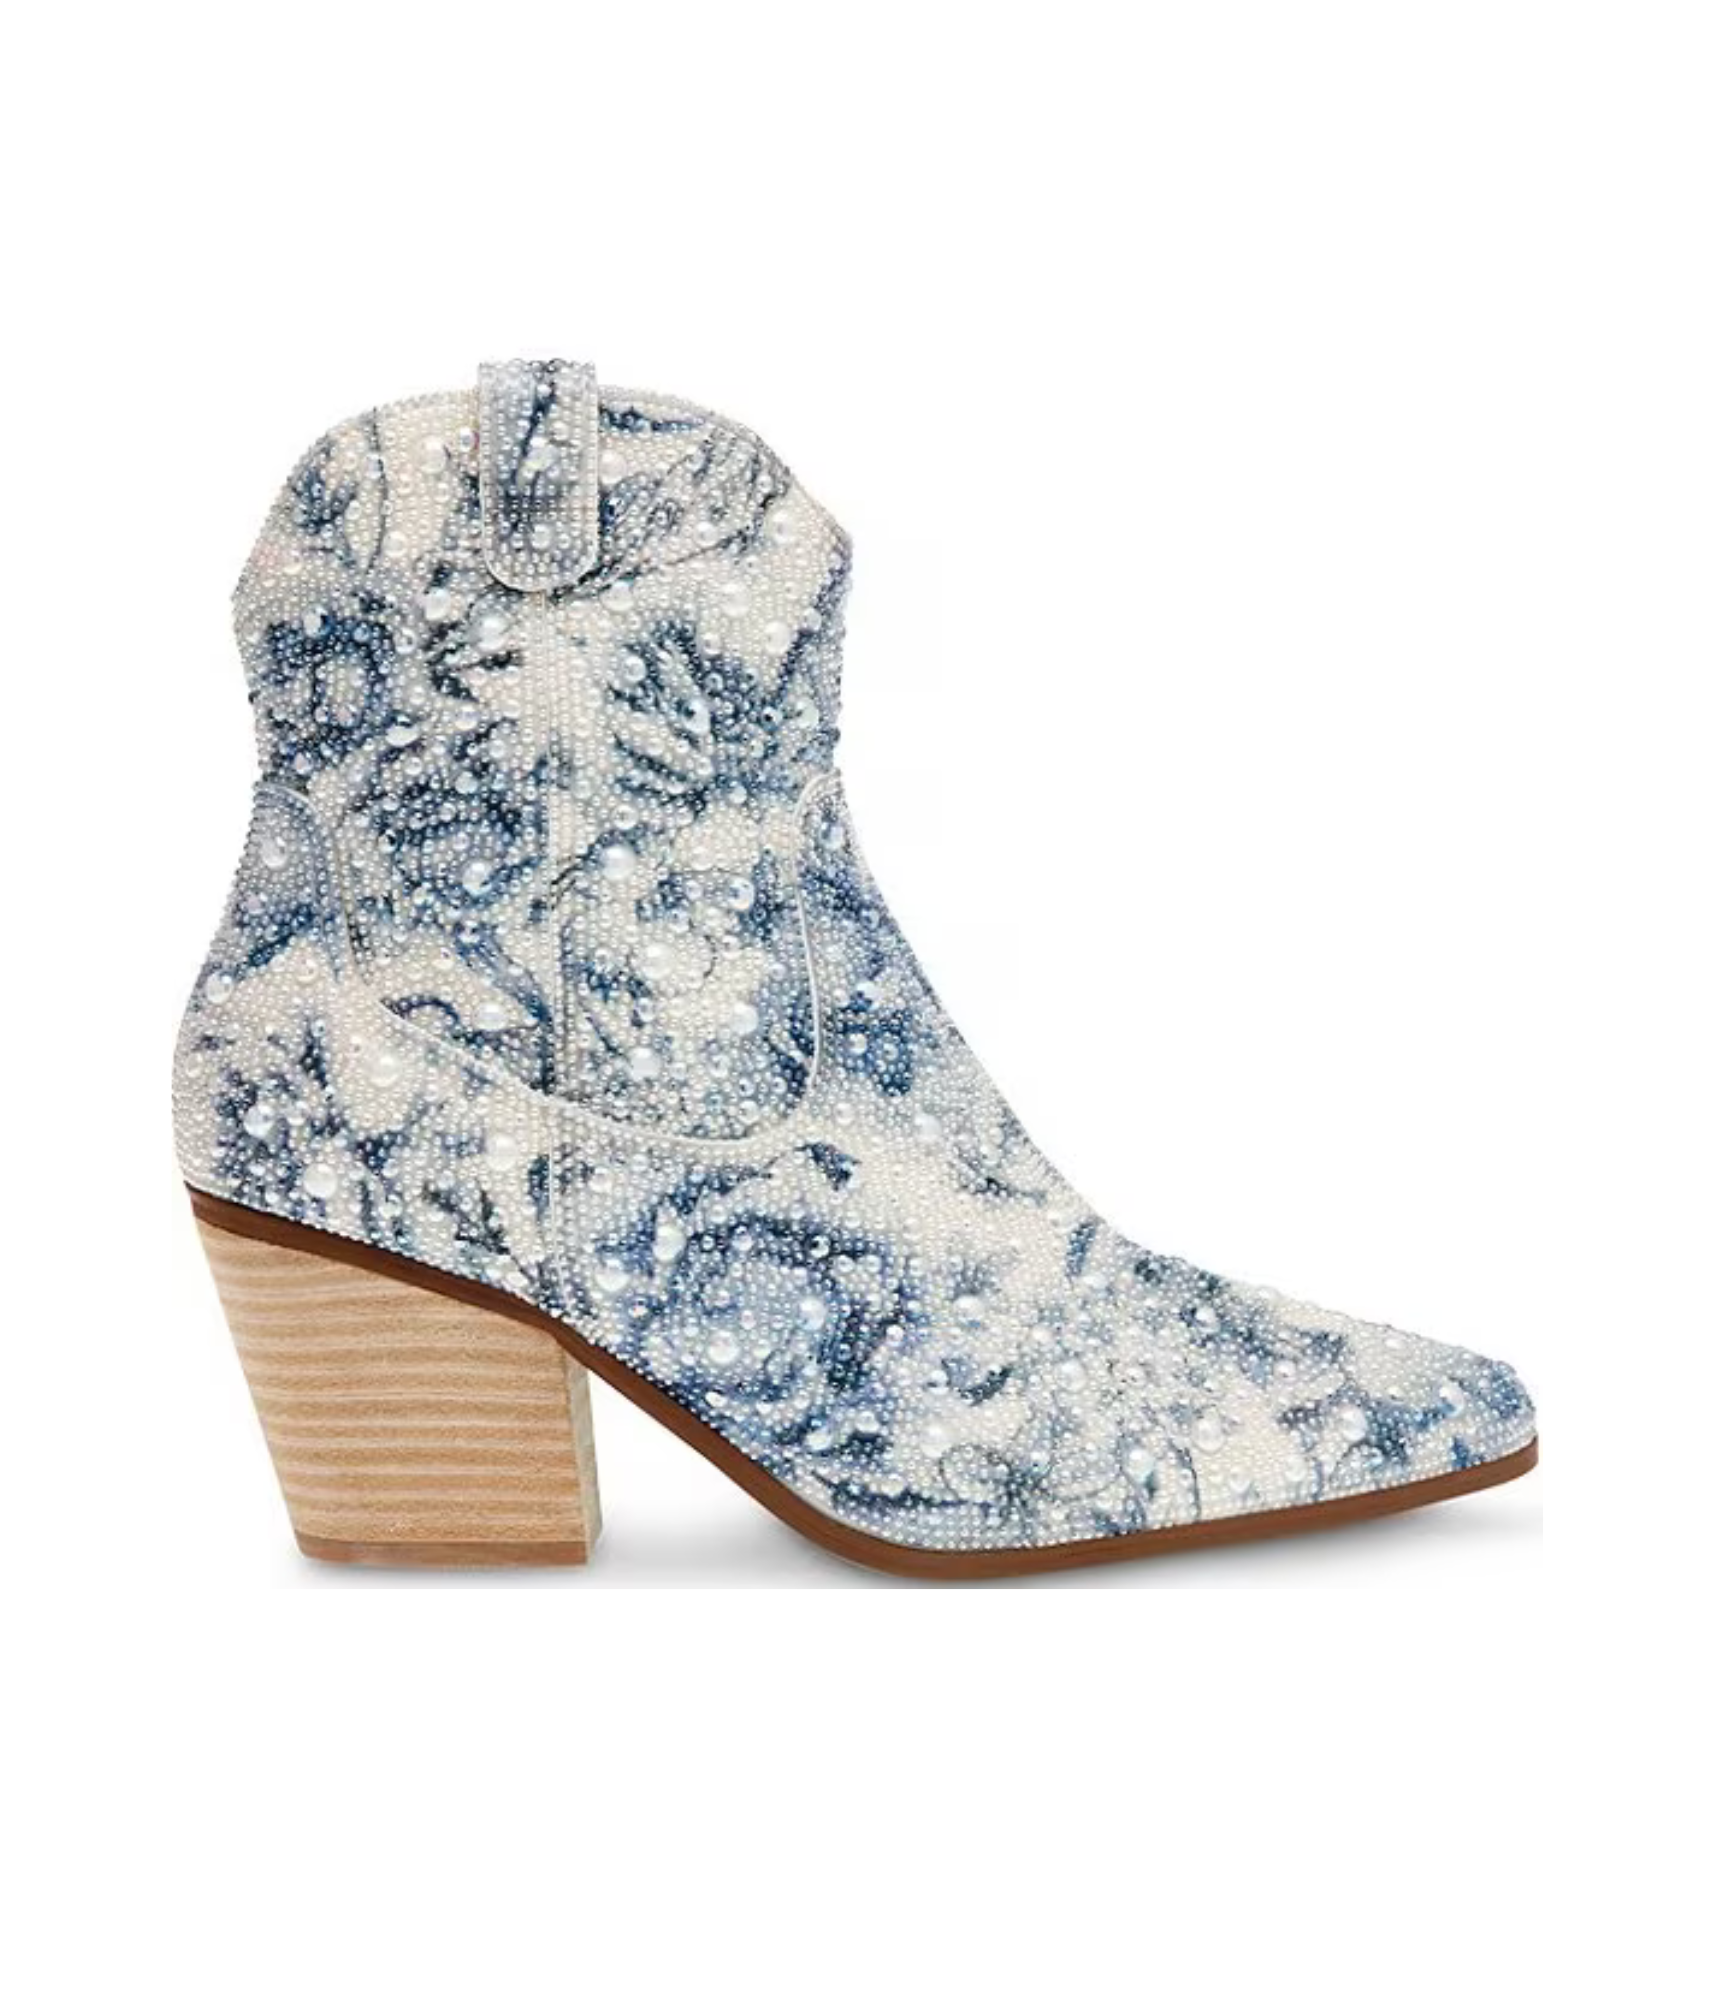 Diva Blue Floral Rhinestone Ankle Boots